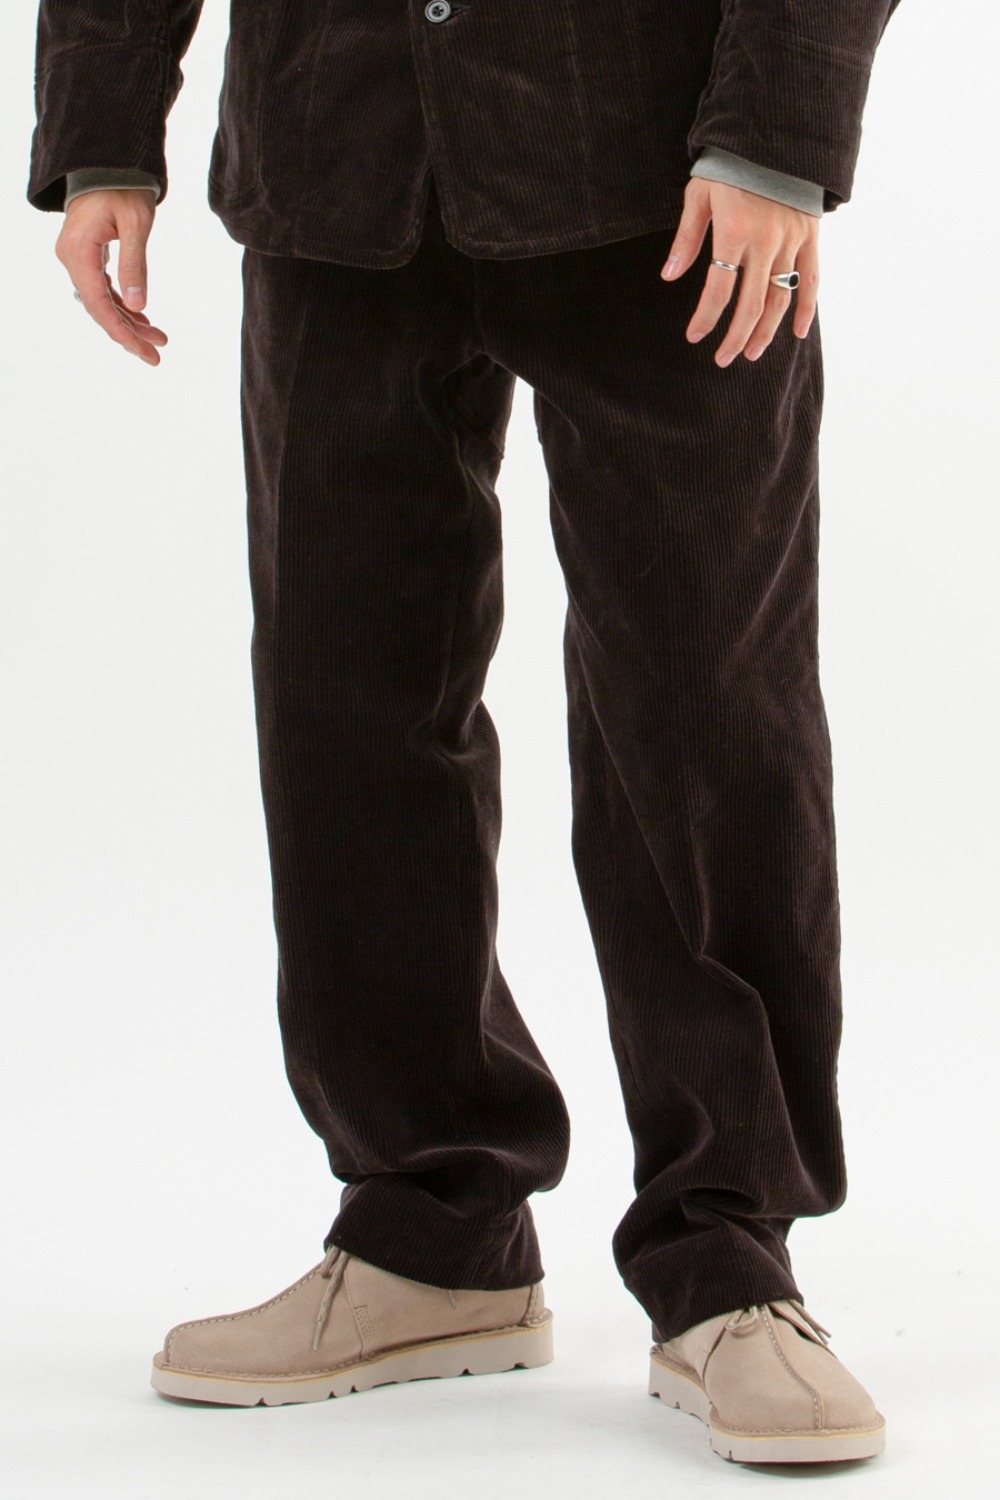 PADED BACK ROVER TROUSER GRAPHITE